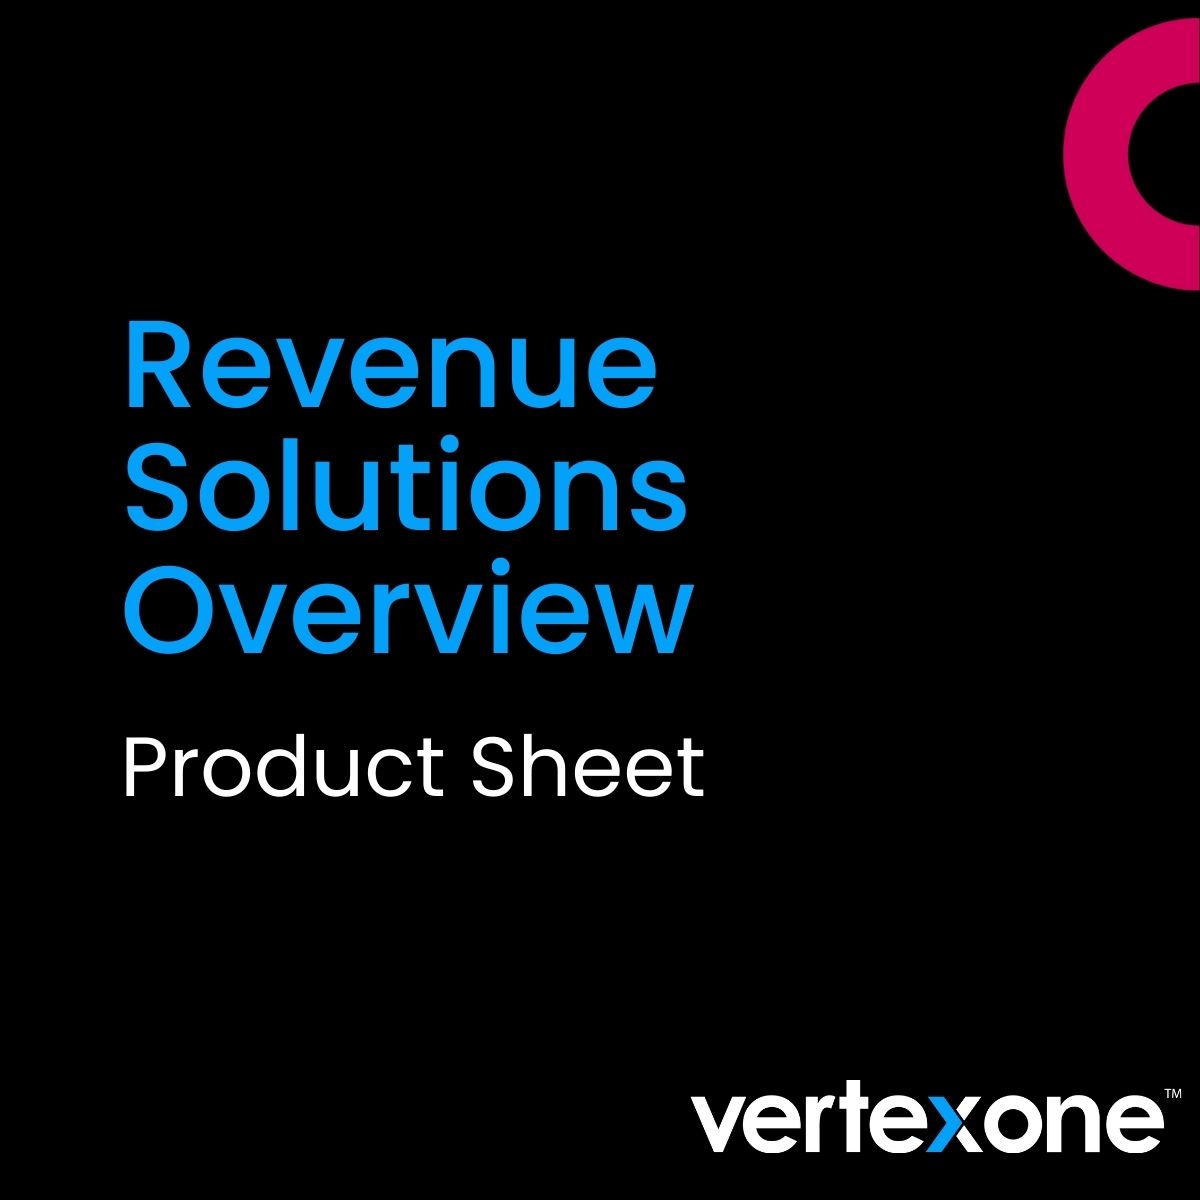 Revenue Solutions Overview Product Sheet